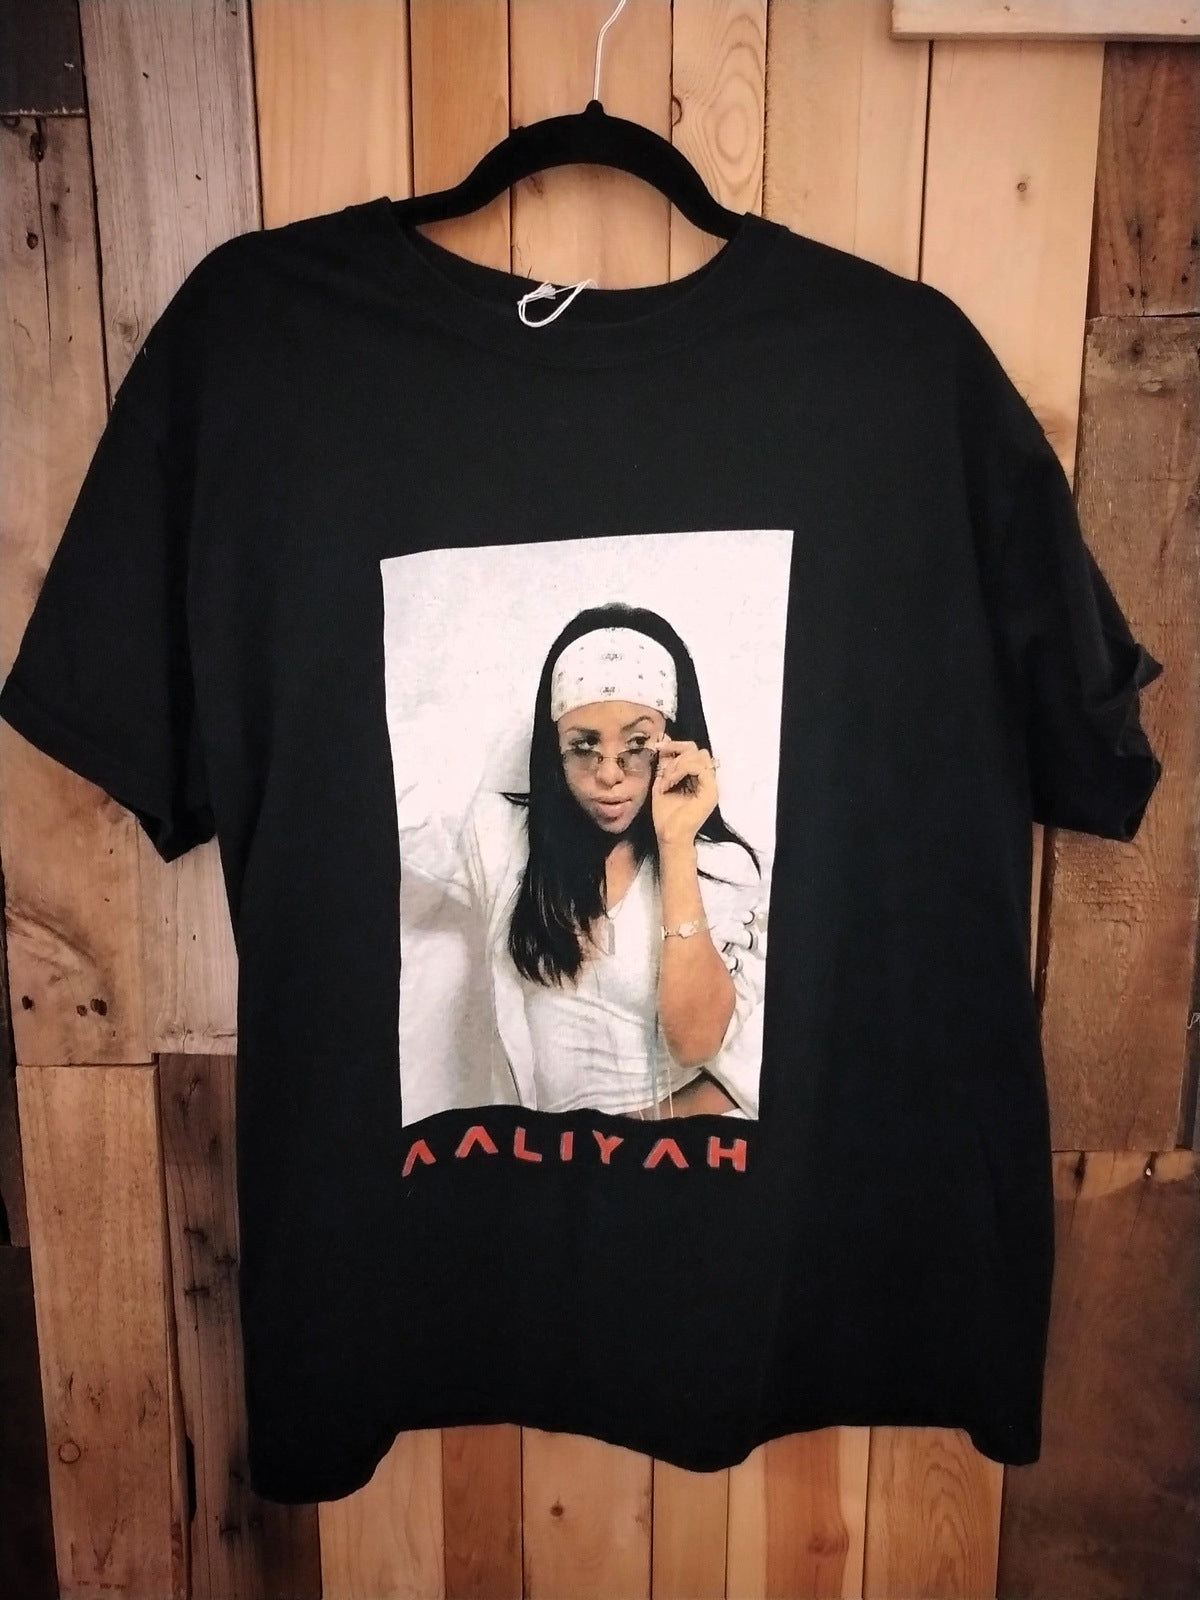 Aaliyah Official Merchandise T Shirt Size Large